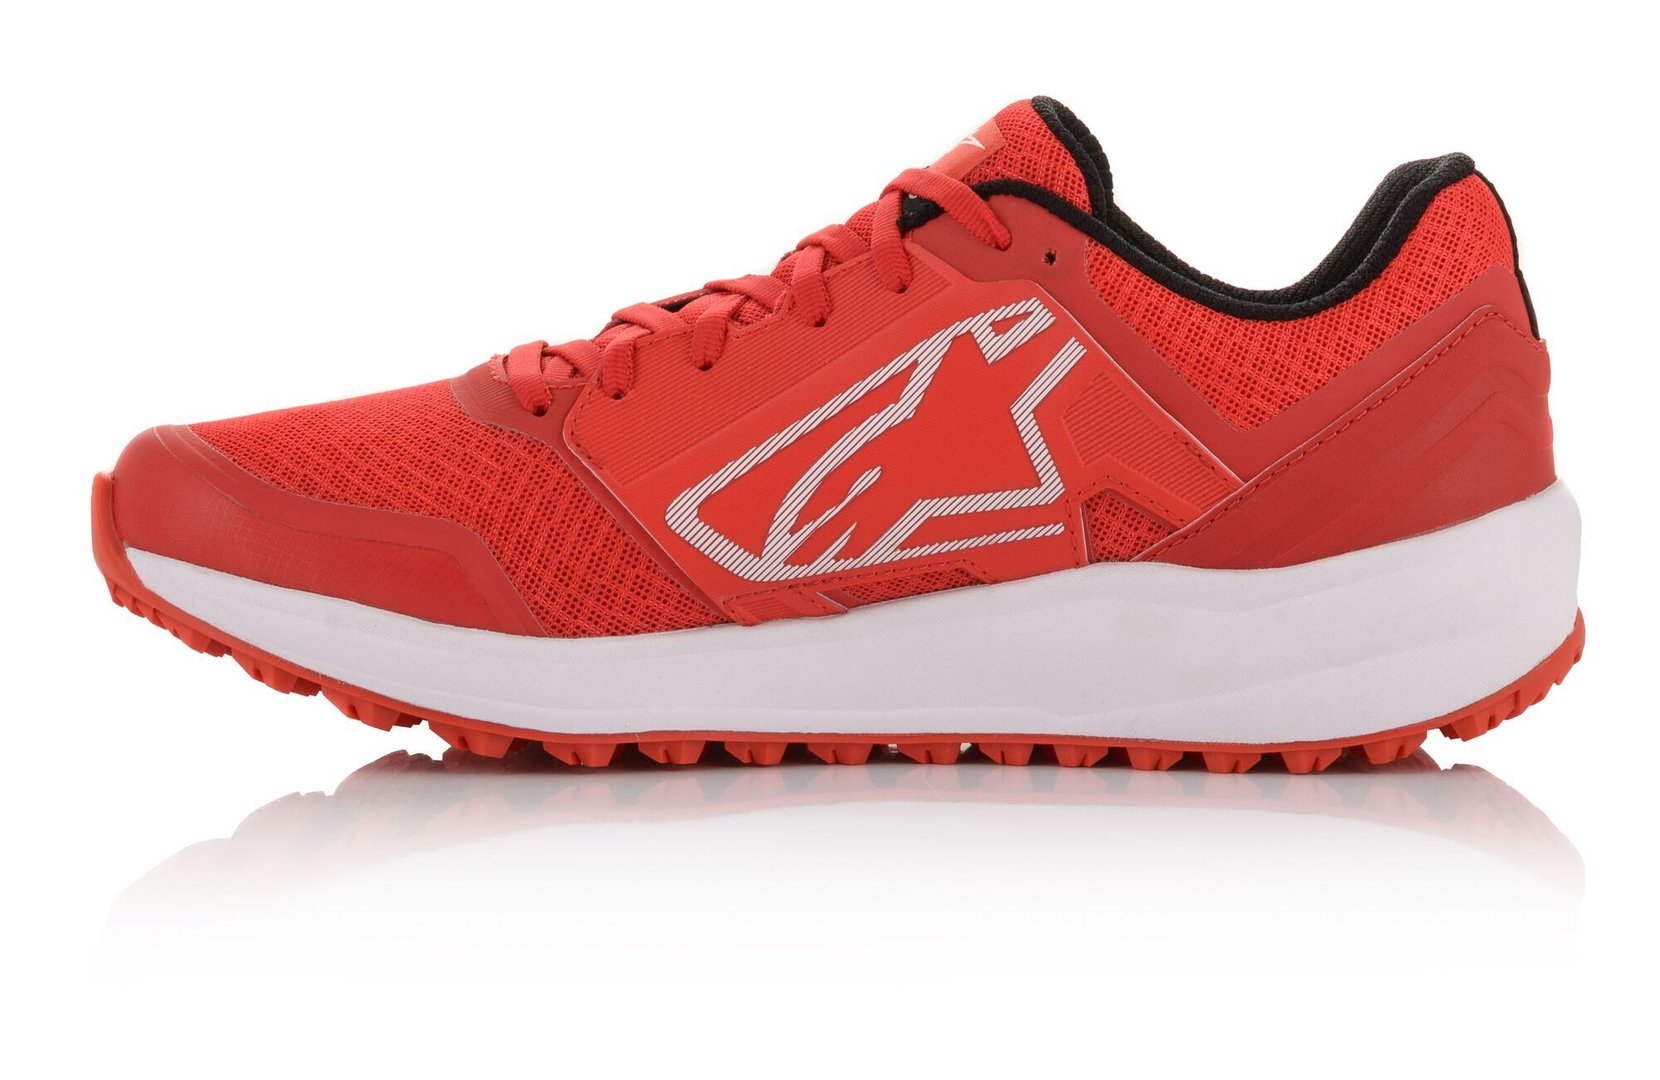 ALPINESTARS 2654820_32_8,5 META TRAIL RUNNING shoes, red/white, size 41 (8,5) (Фото-3)